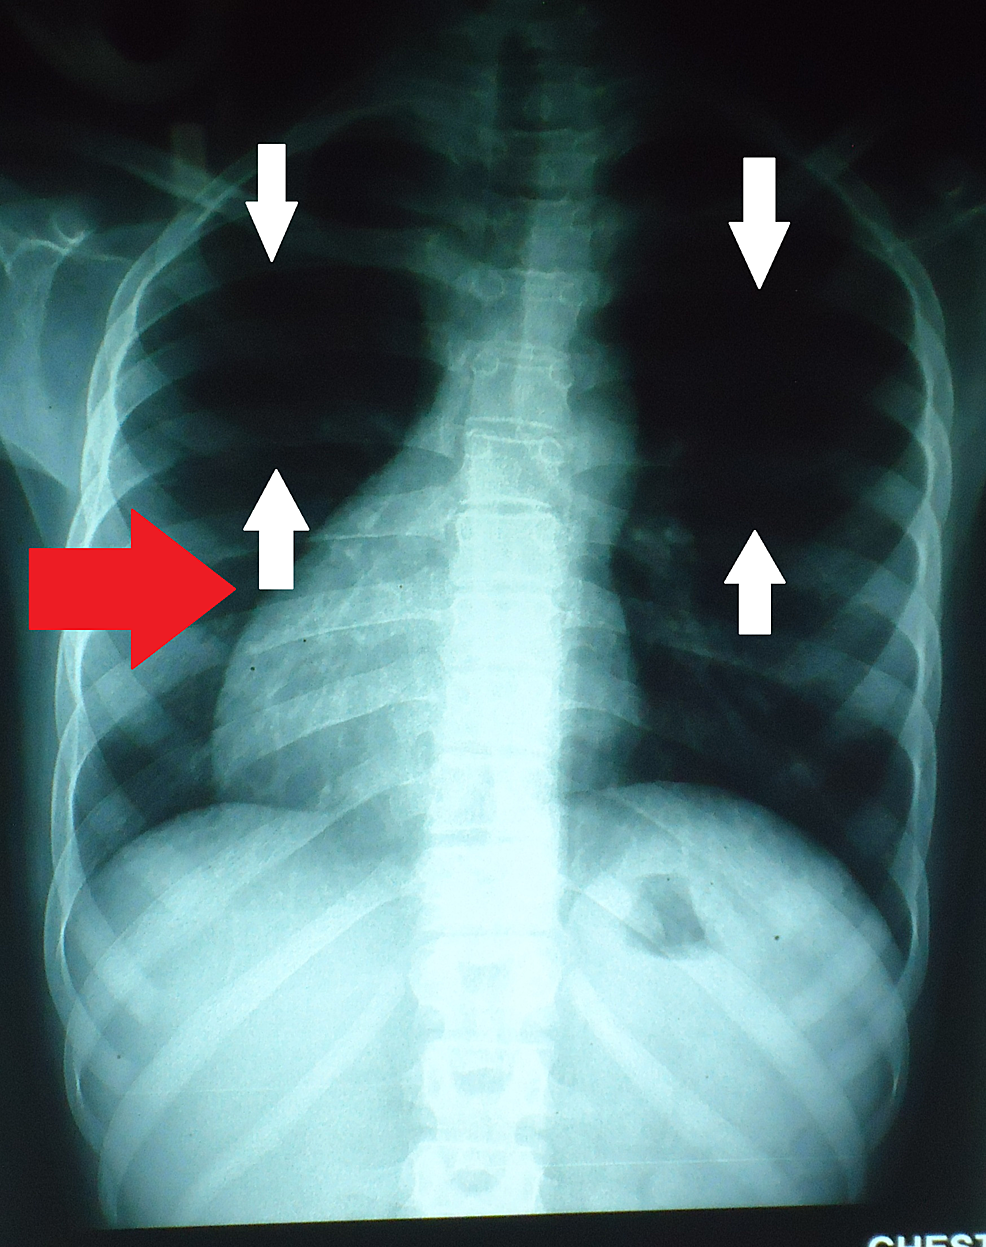 Posteroanterior-chest-X-ray-PA-showing-oligemic-lung-fields-(see-white-arrows).-The-red-arrow-indicates-dextrocardia